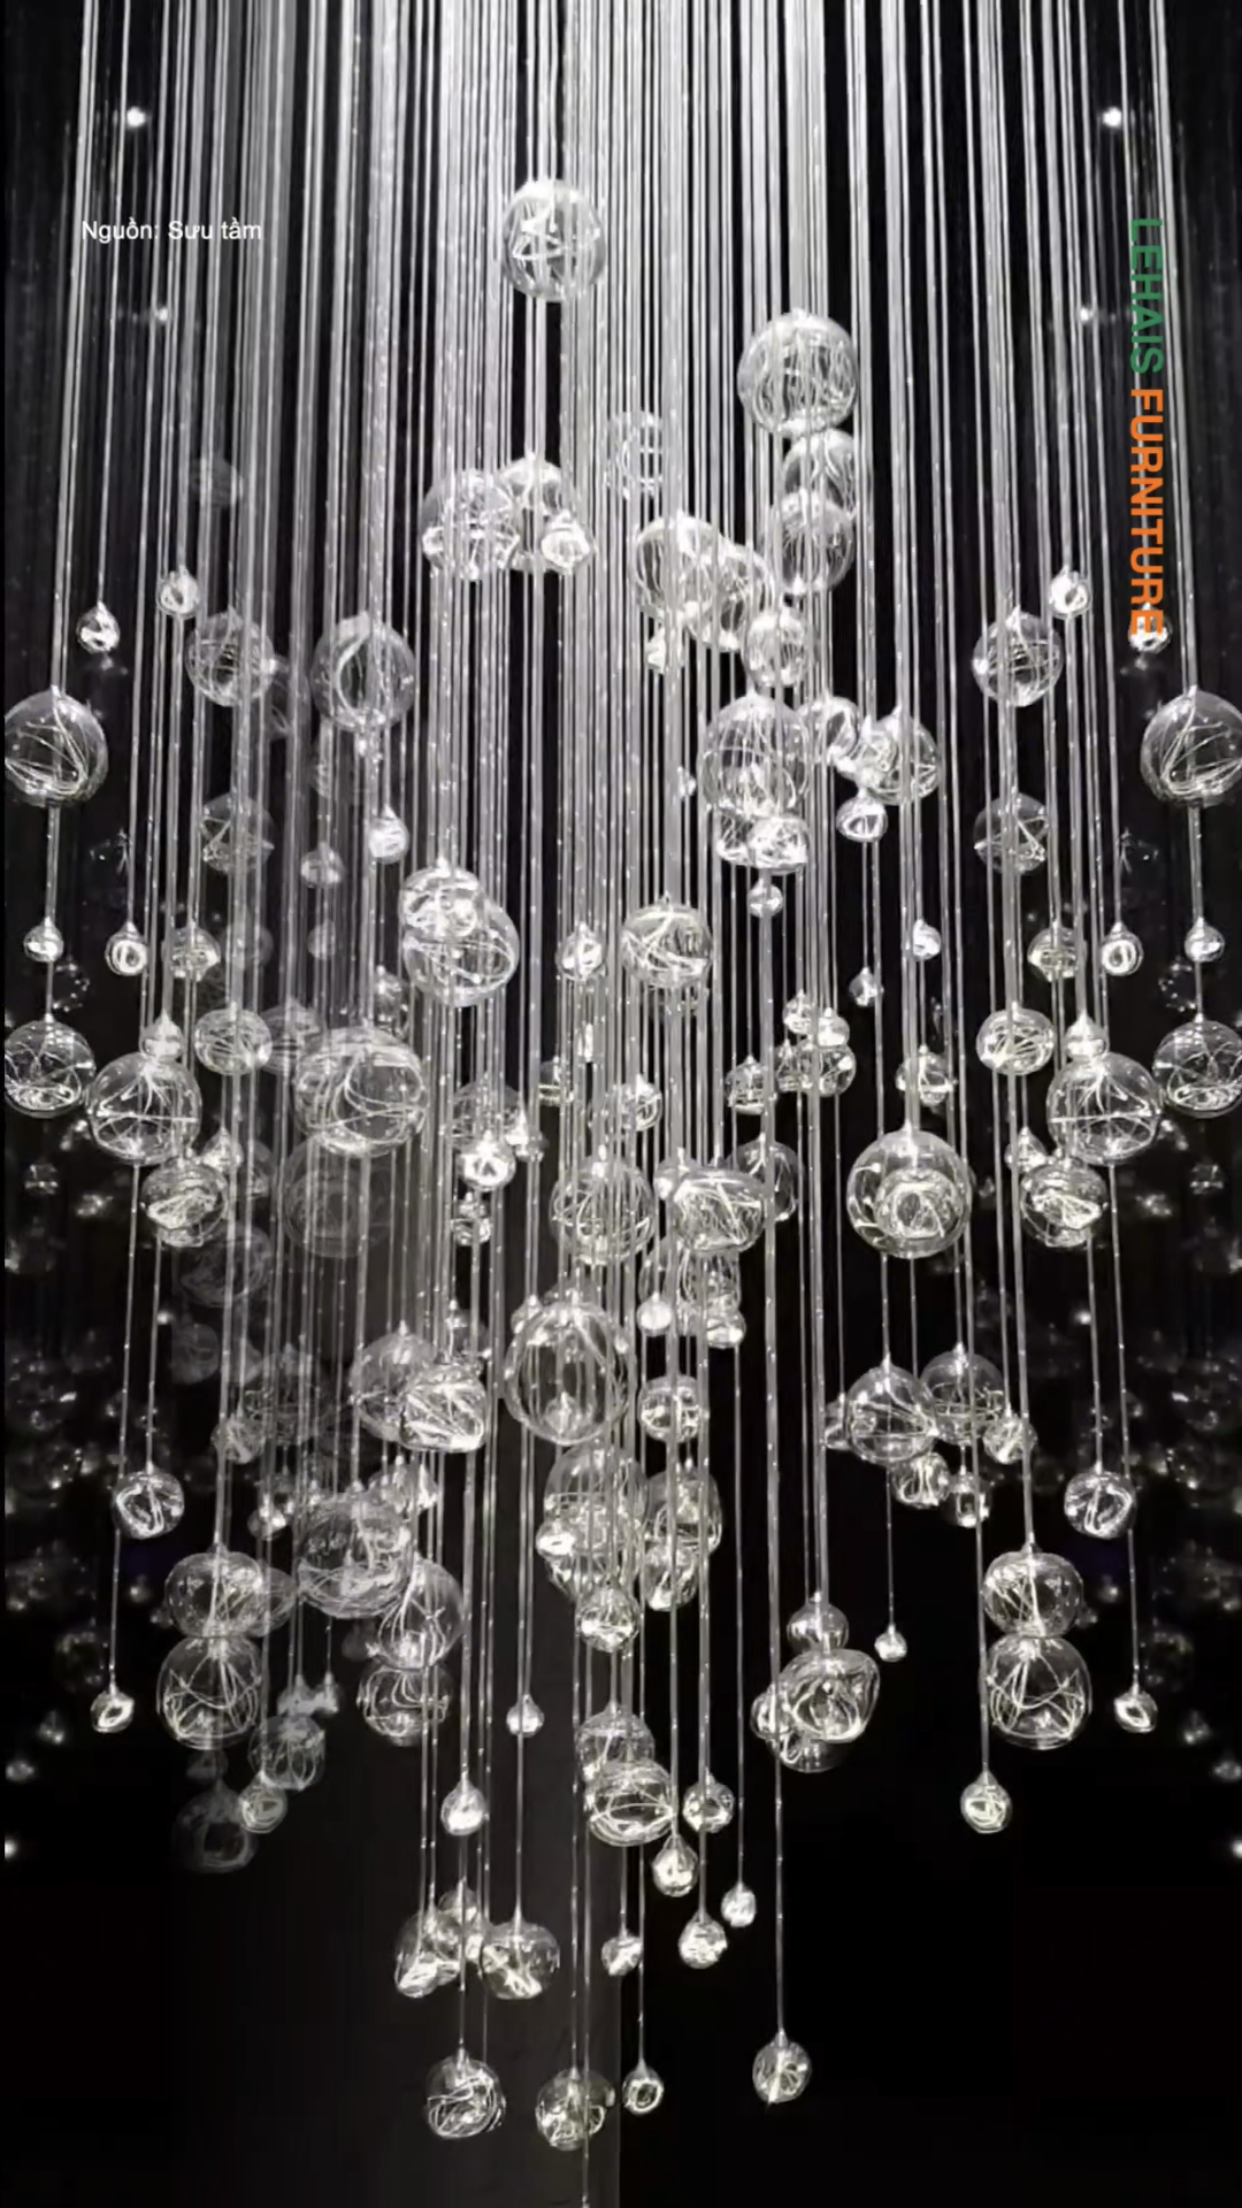 Chandelier made of beautiful globe-shaped crystal 1